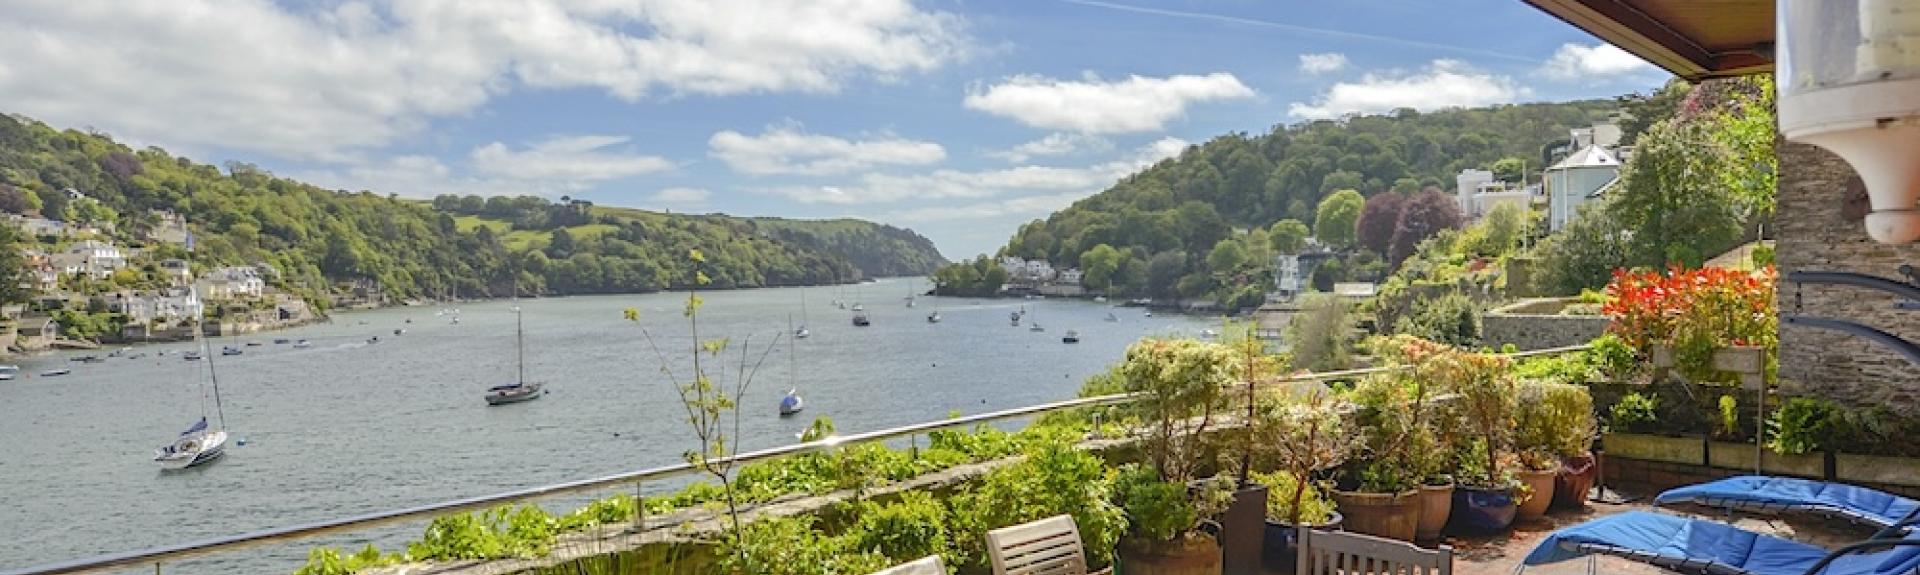 A view of Dartmouth estuary seen from the covered terrace of a waterside holiday let